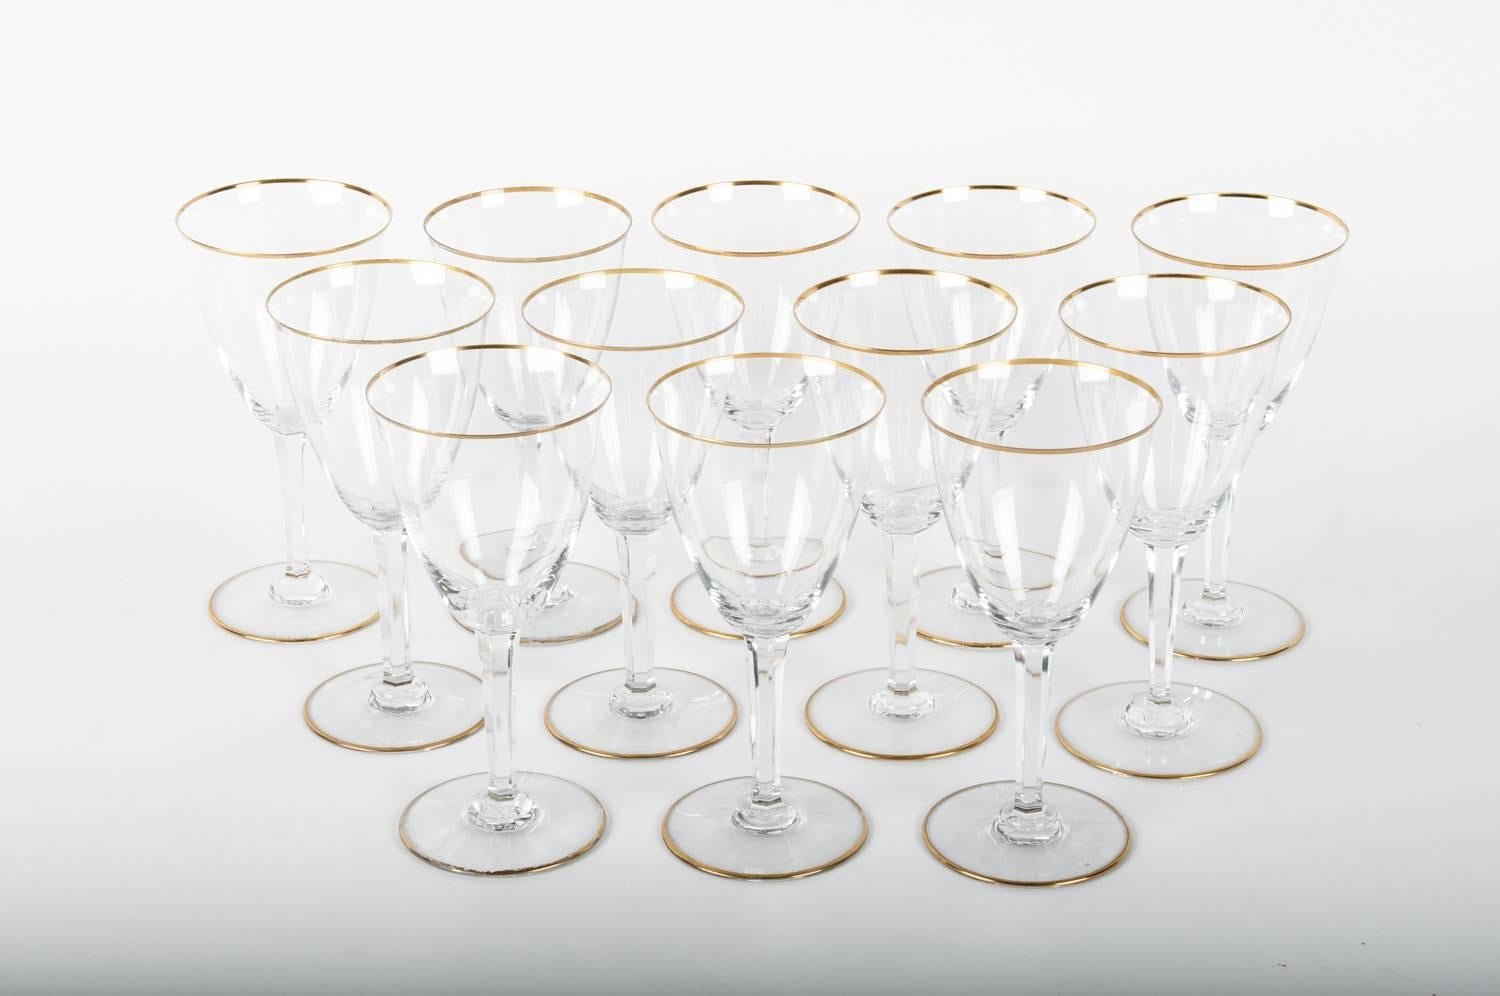 Vintage Baccarat crystal set of 12 wine or water glasses with gold trimmed top and base. Maker's mark on each glass. Excellent condition. Each glass measure 7 3/8 inches tall X 3 5/8 inches across X 3 1/4 inches base.